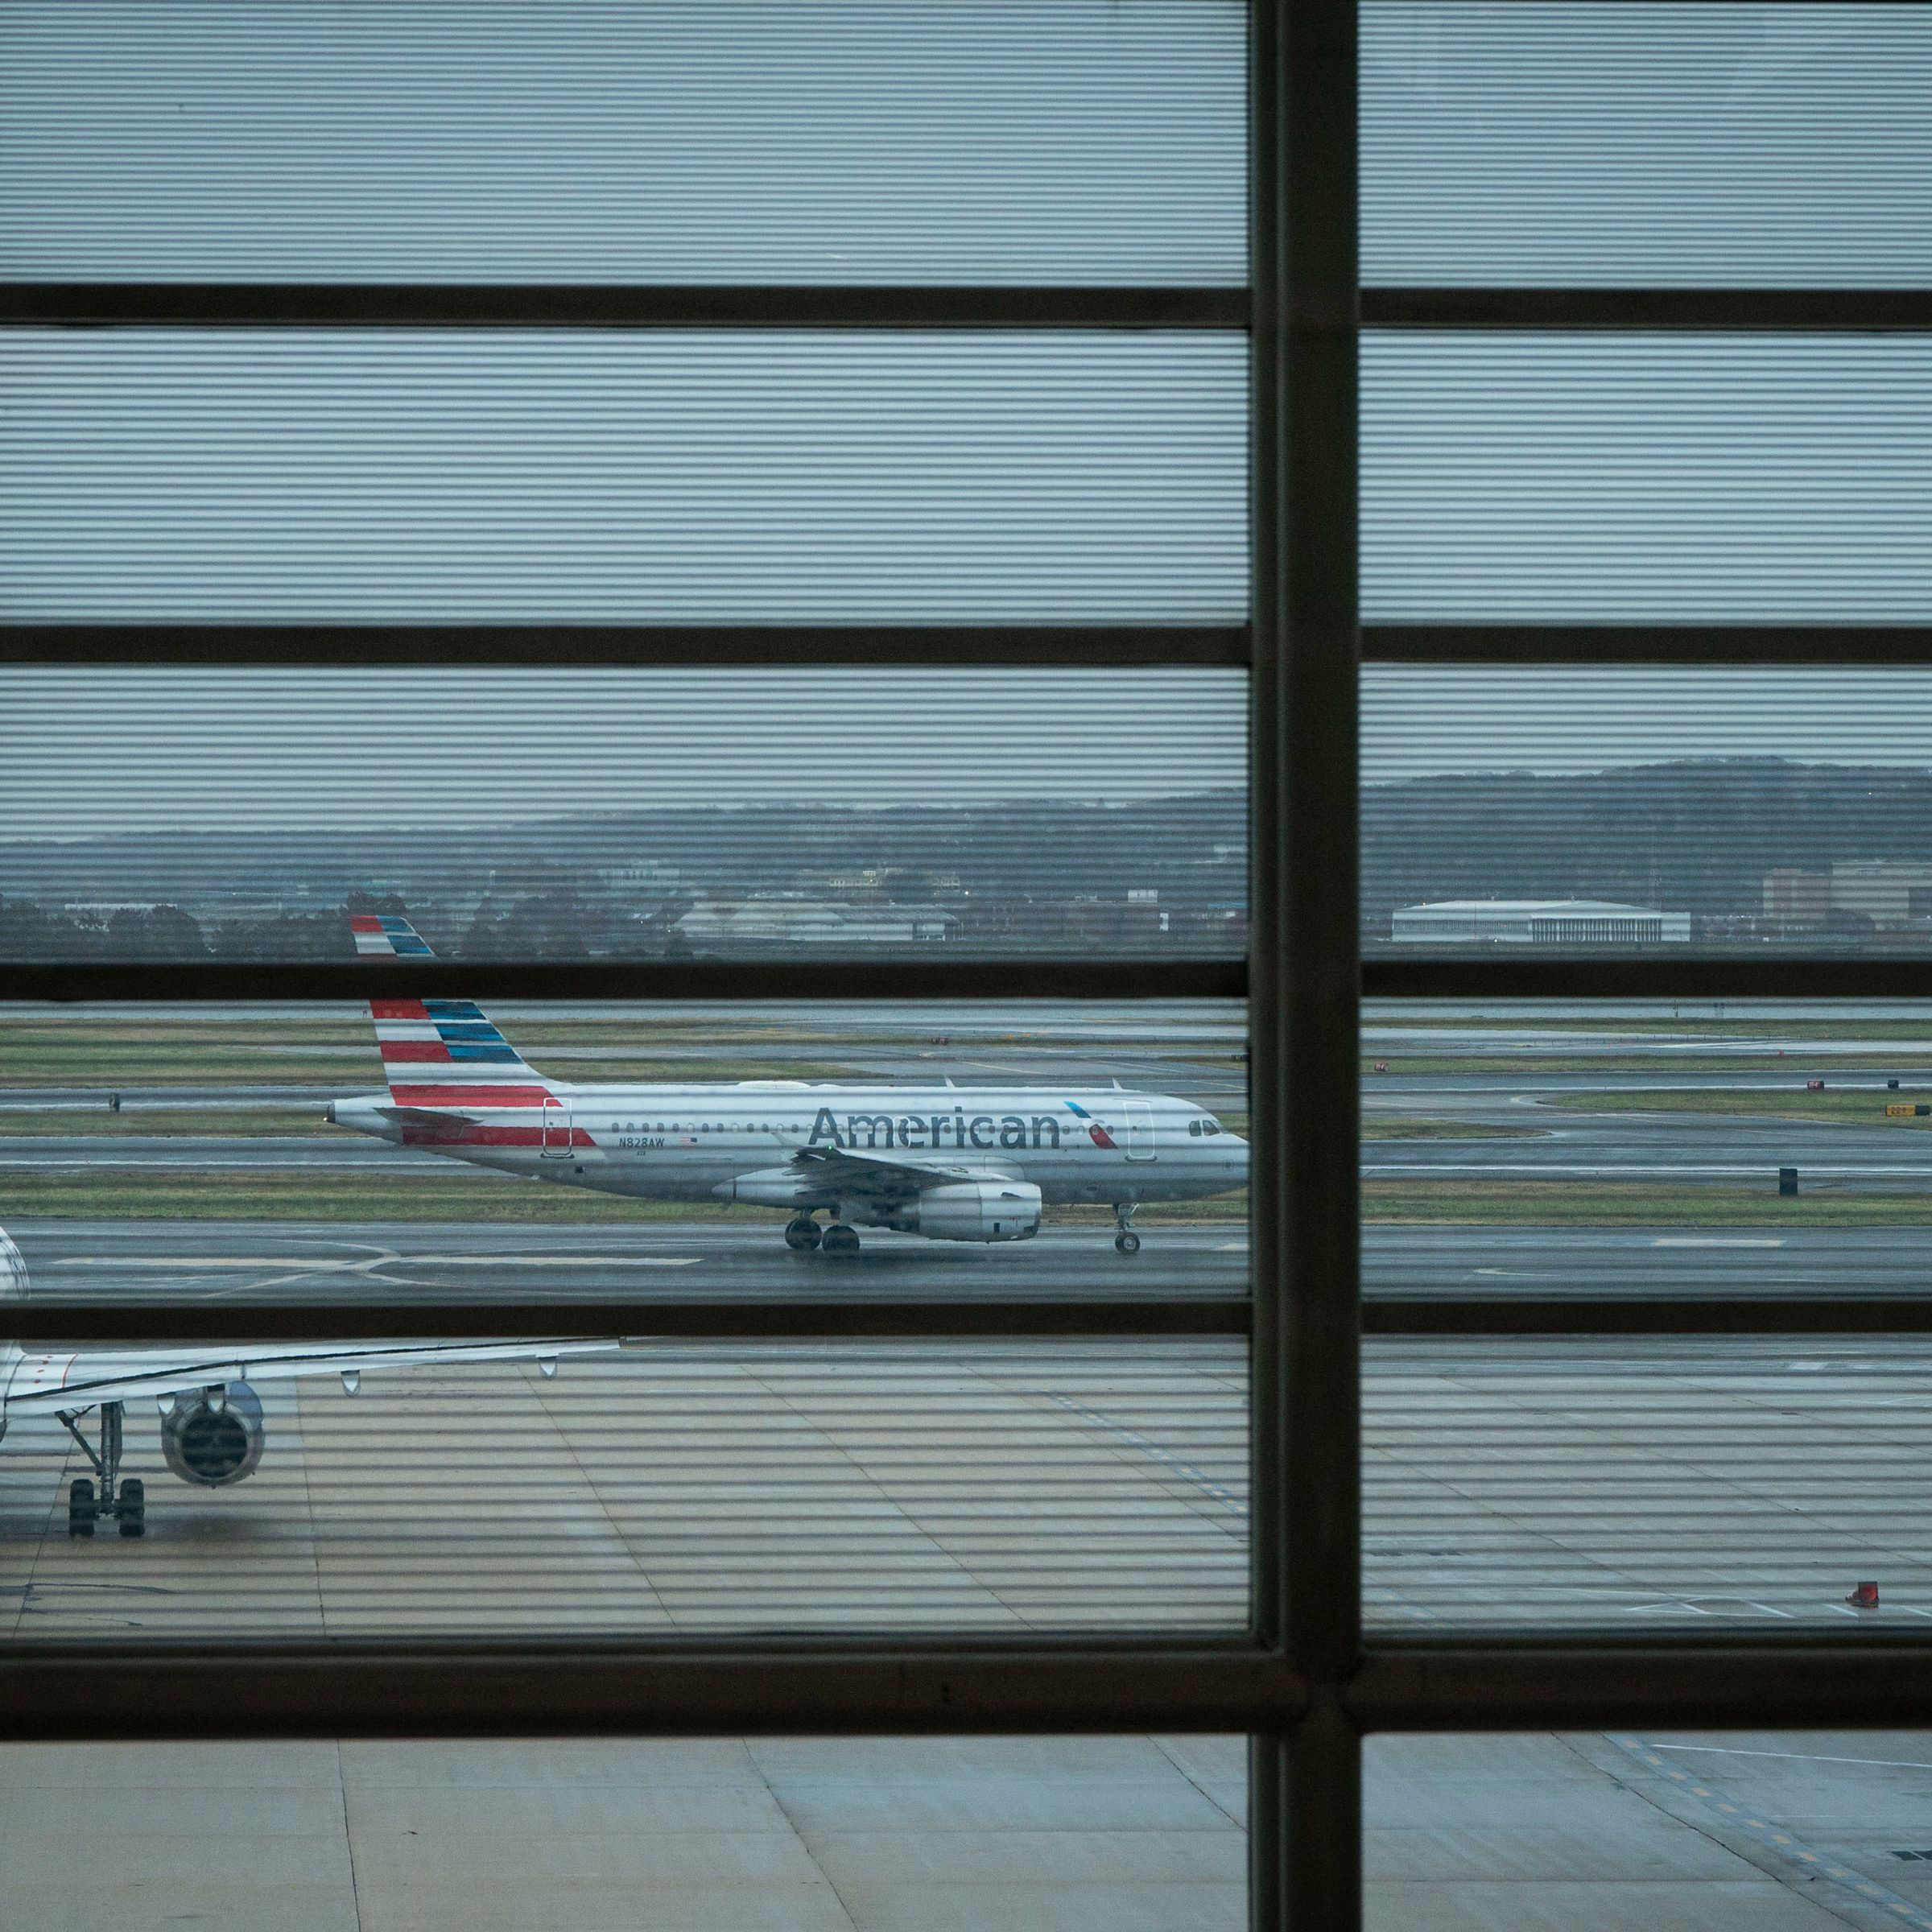 Several planes sitting on a runway seen through an airport window. A plane with the American Airlines logo can be seen in the center of the photo between window panes.